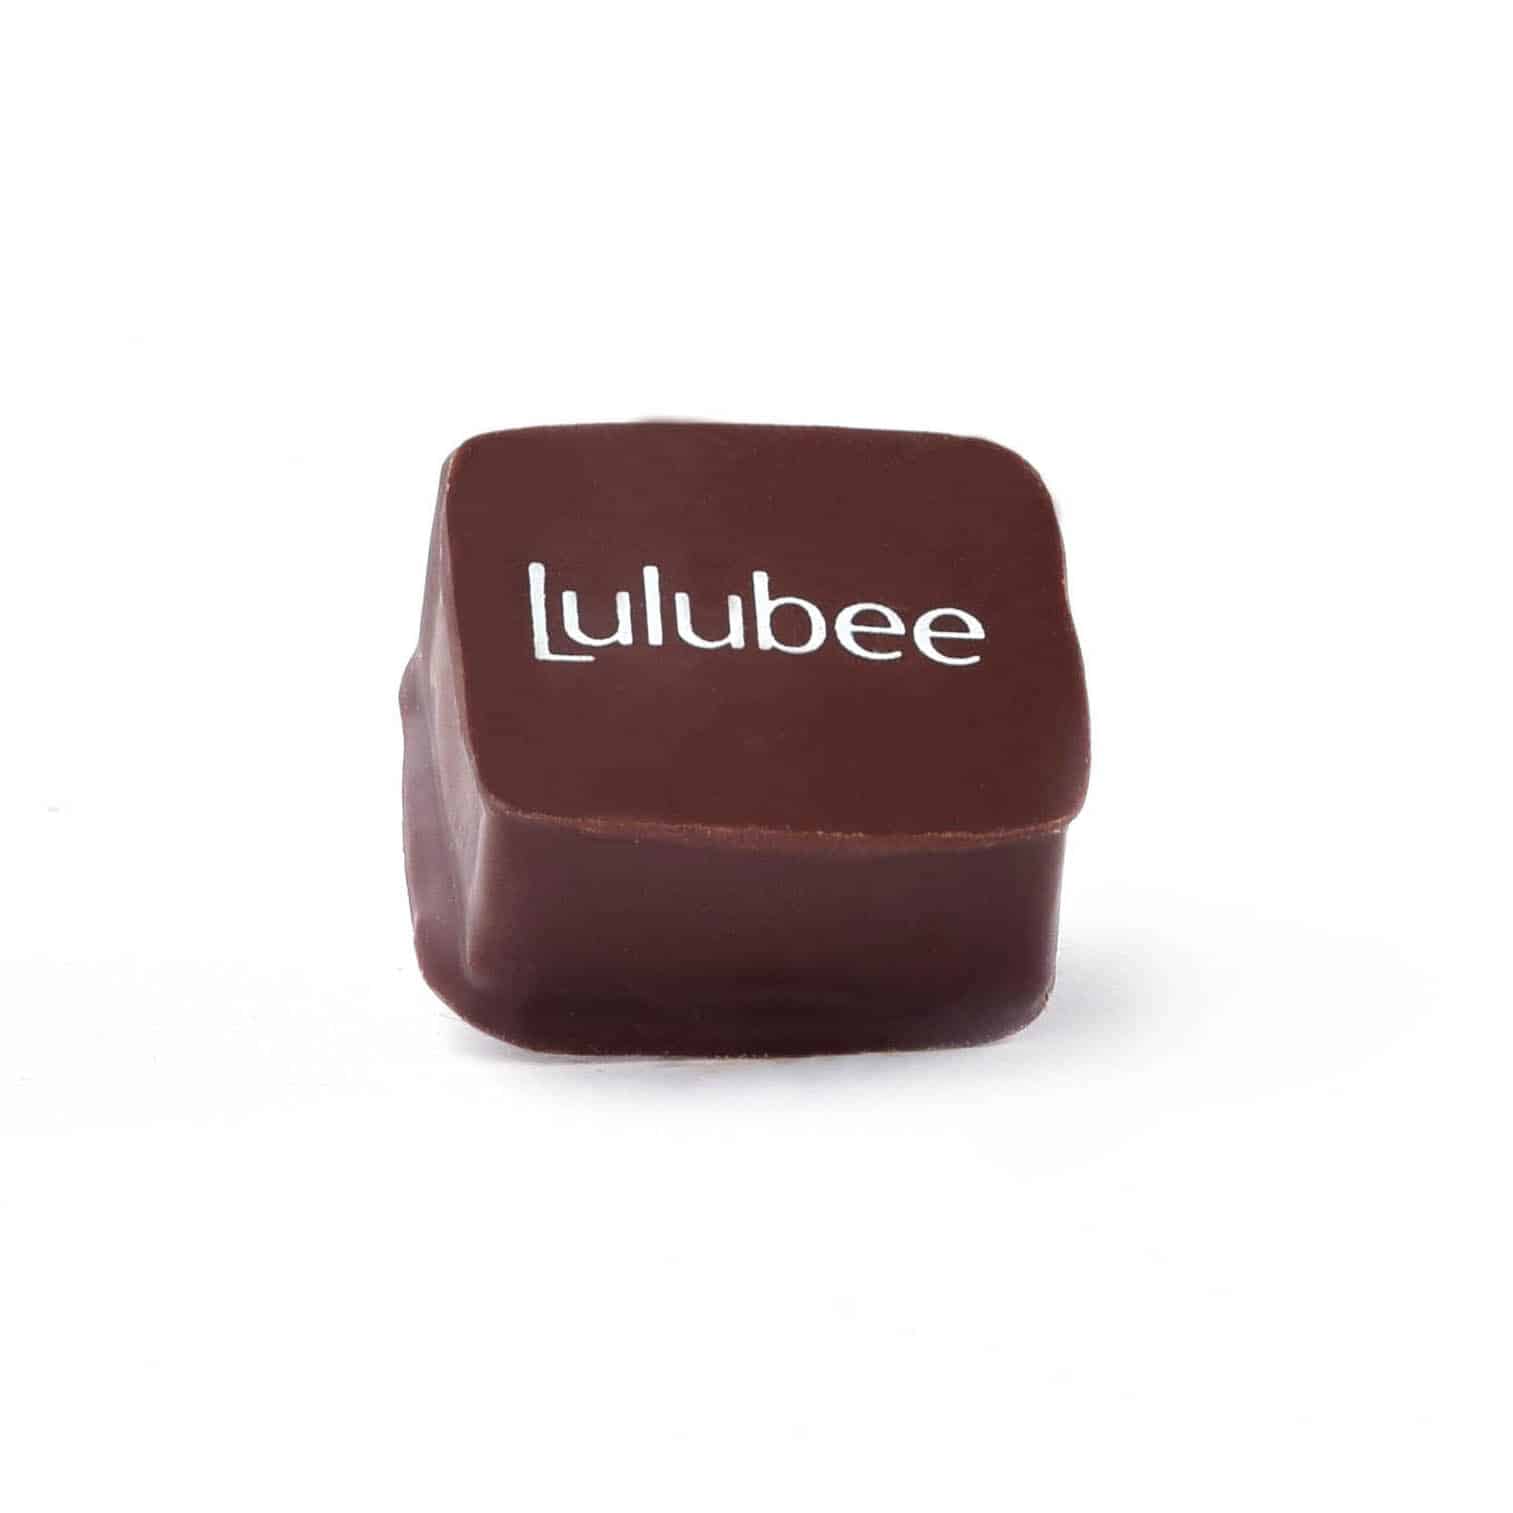 Side view of a gourmet dark chocolate truffle that has the Lulubee logo on it